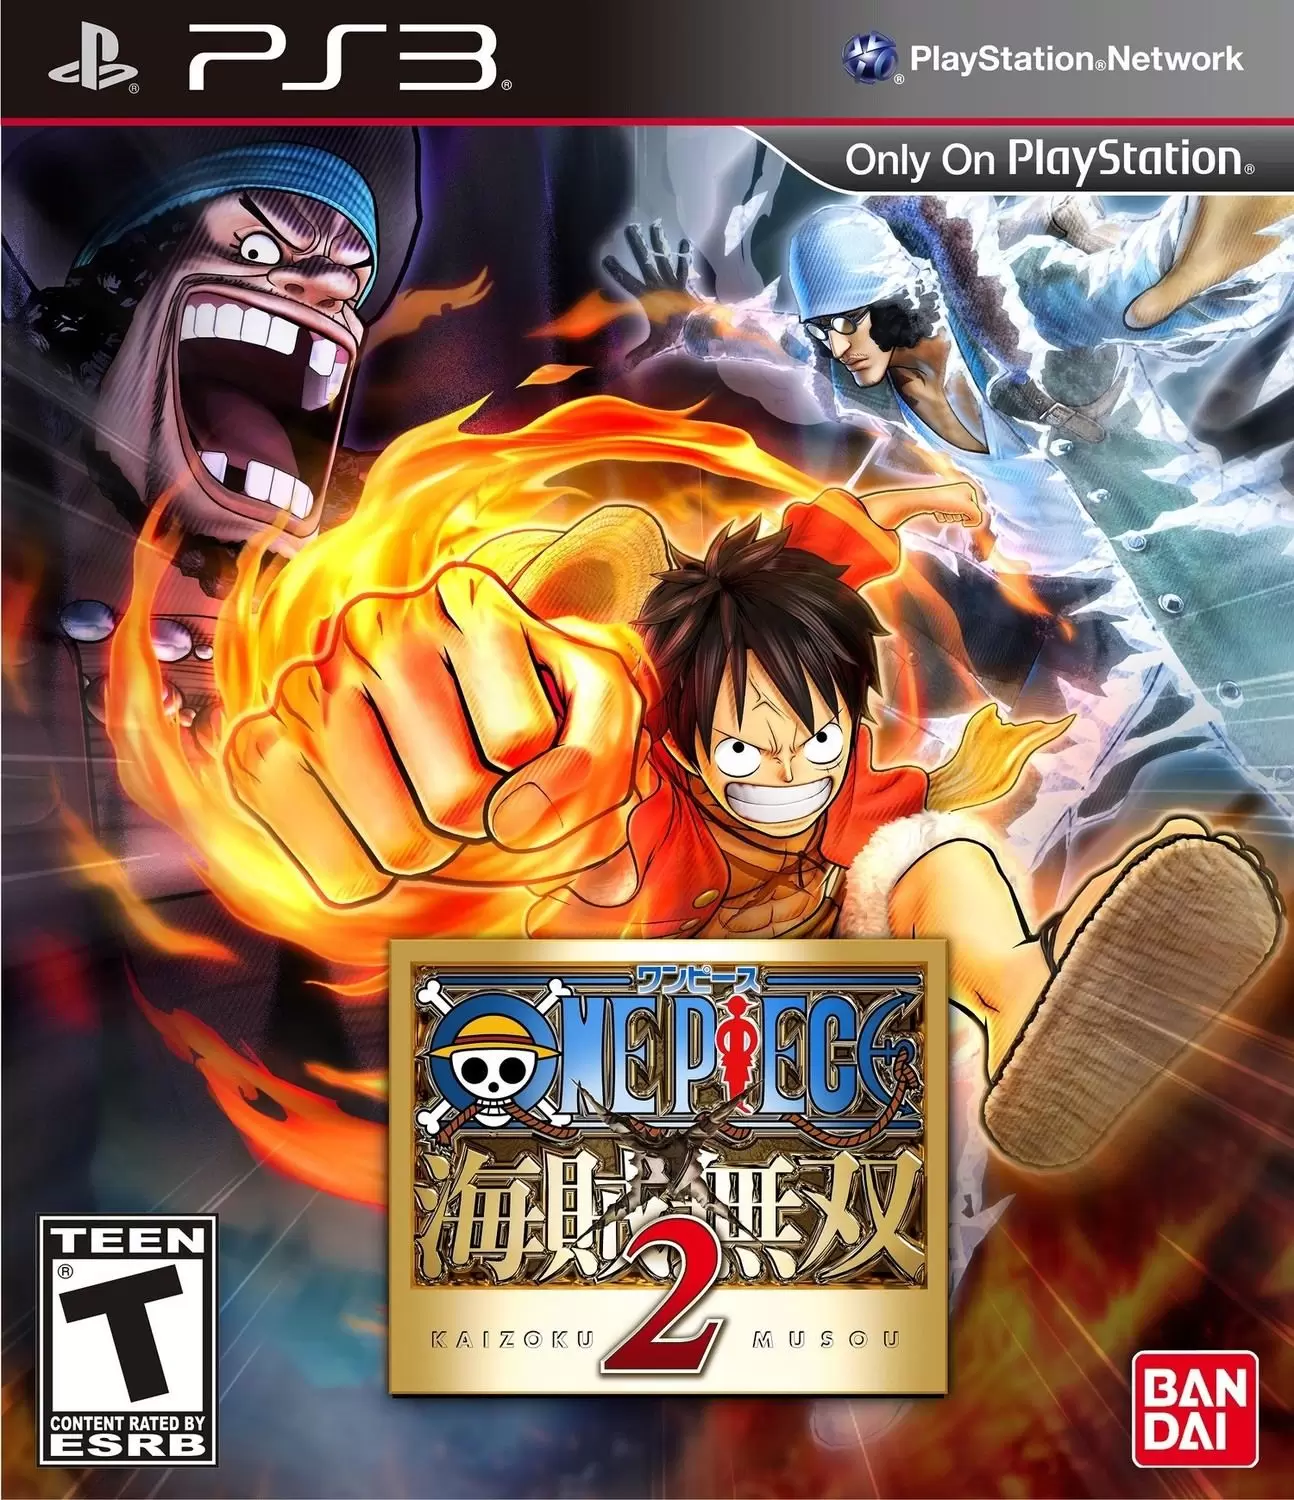 PS3 Games - One Piece: Pirate Warriors 2